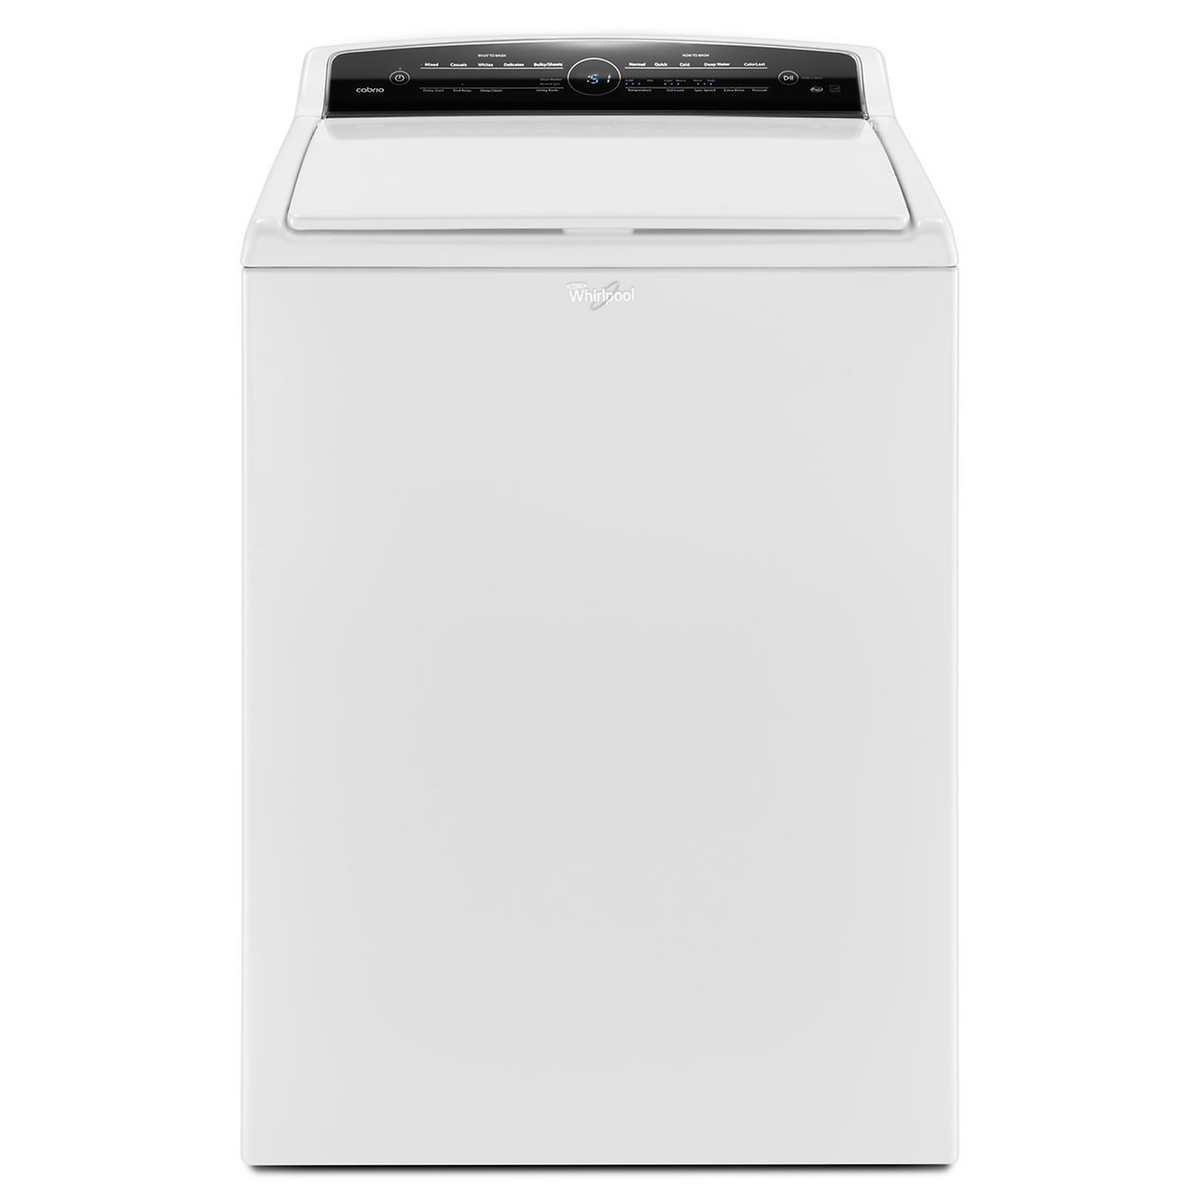 Whirlpool Cabrio High Efficiency 4 8cuft Top Load Washer With Industry Exclusive Colorlast Option,Tommy Pickles Maternal Grandparents